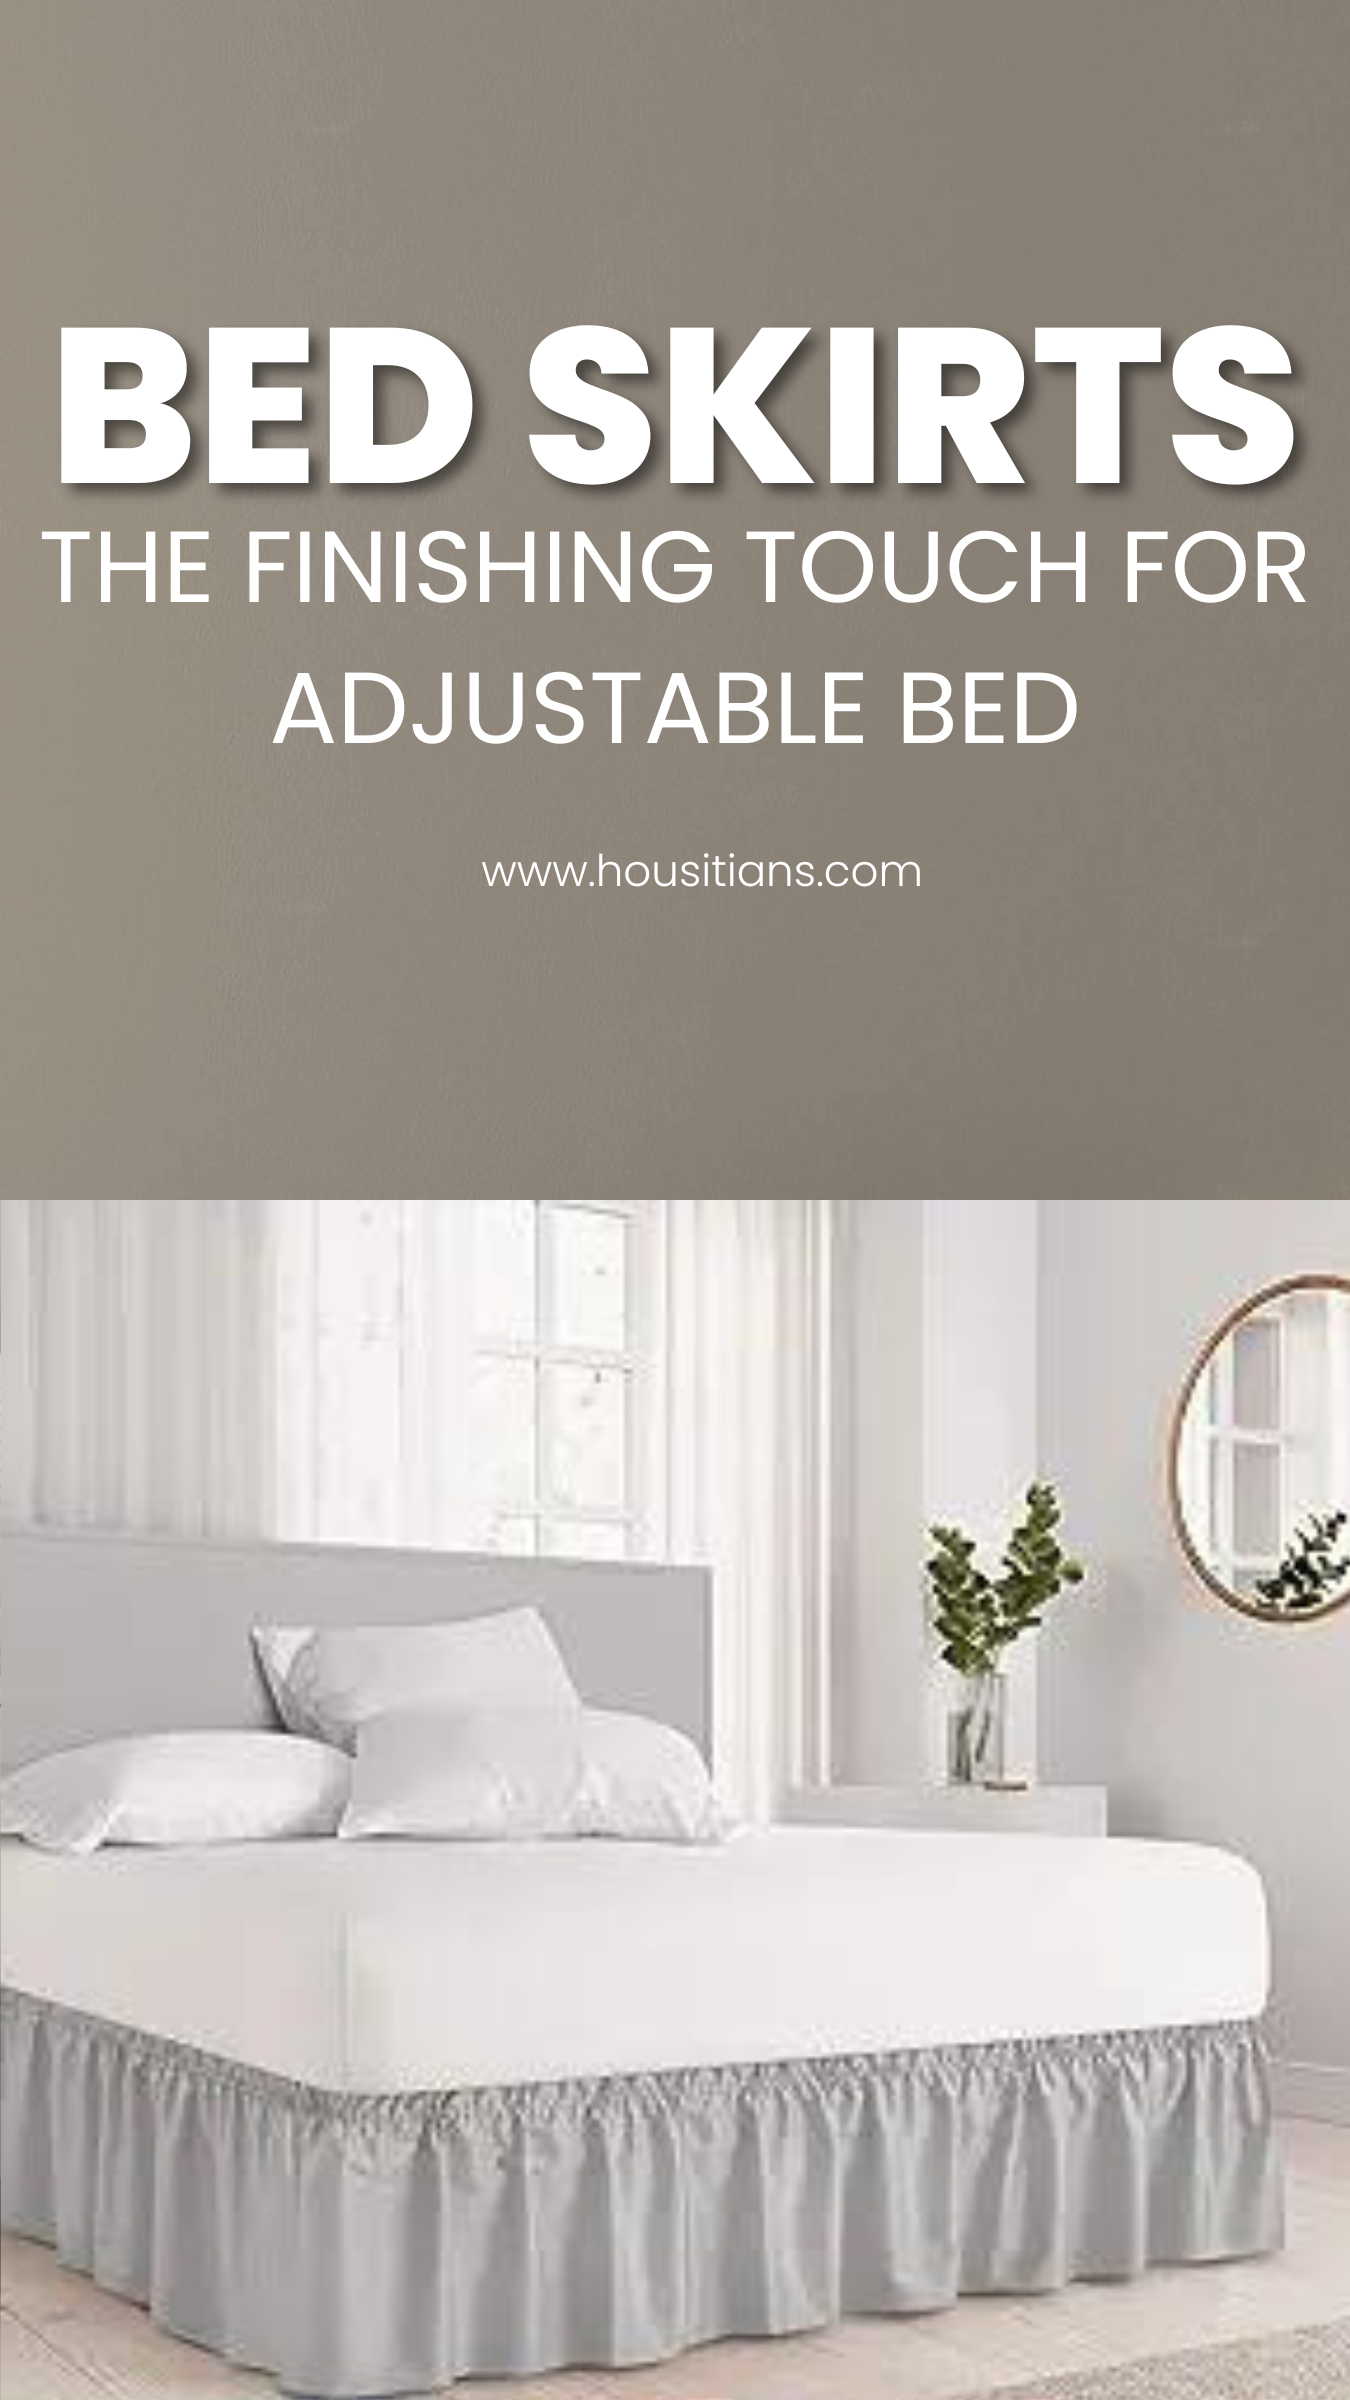 Bed Skirts: The Finishing Touch for Your Adjustable Bed